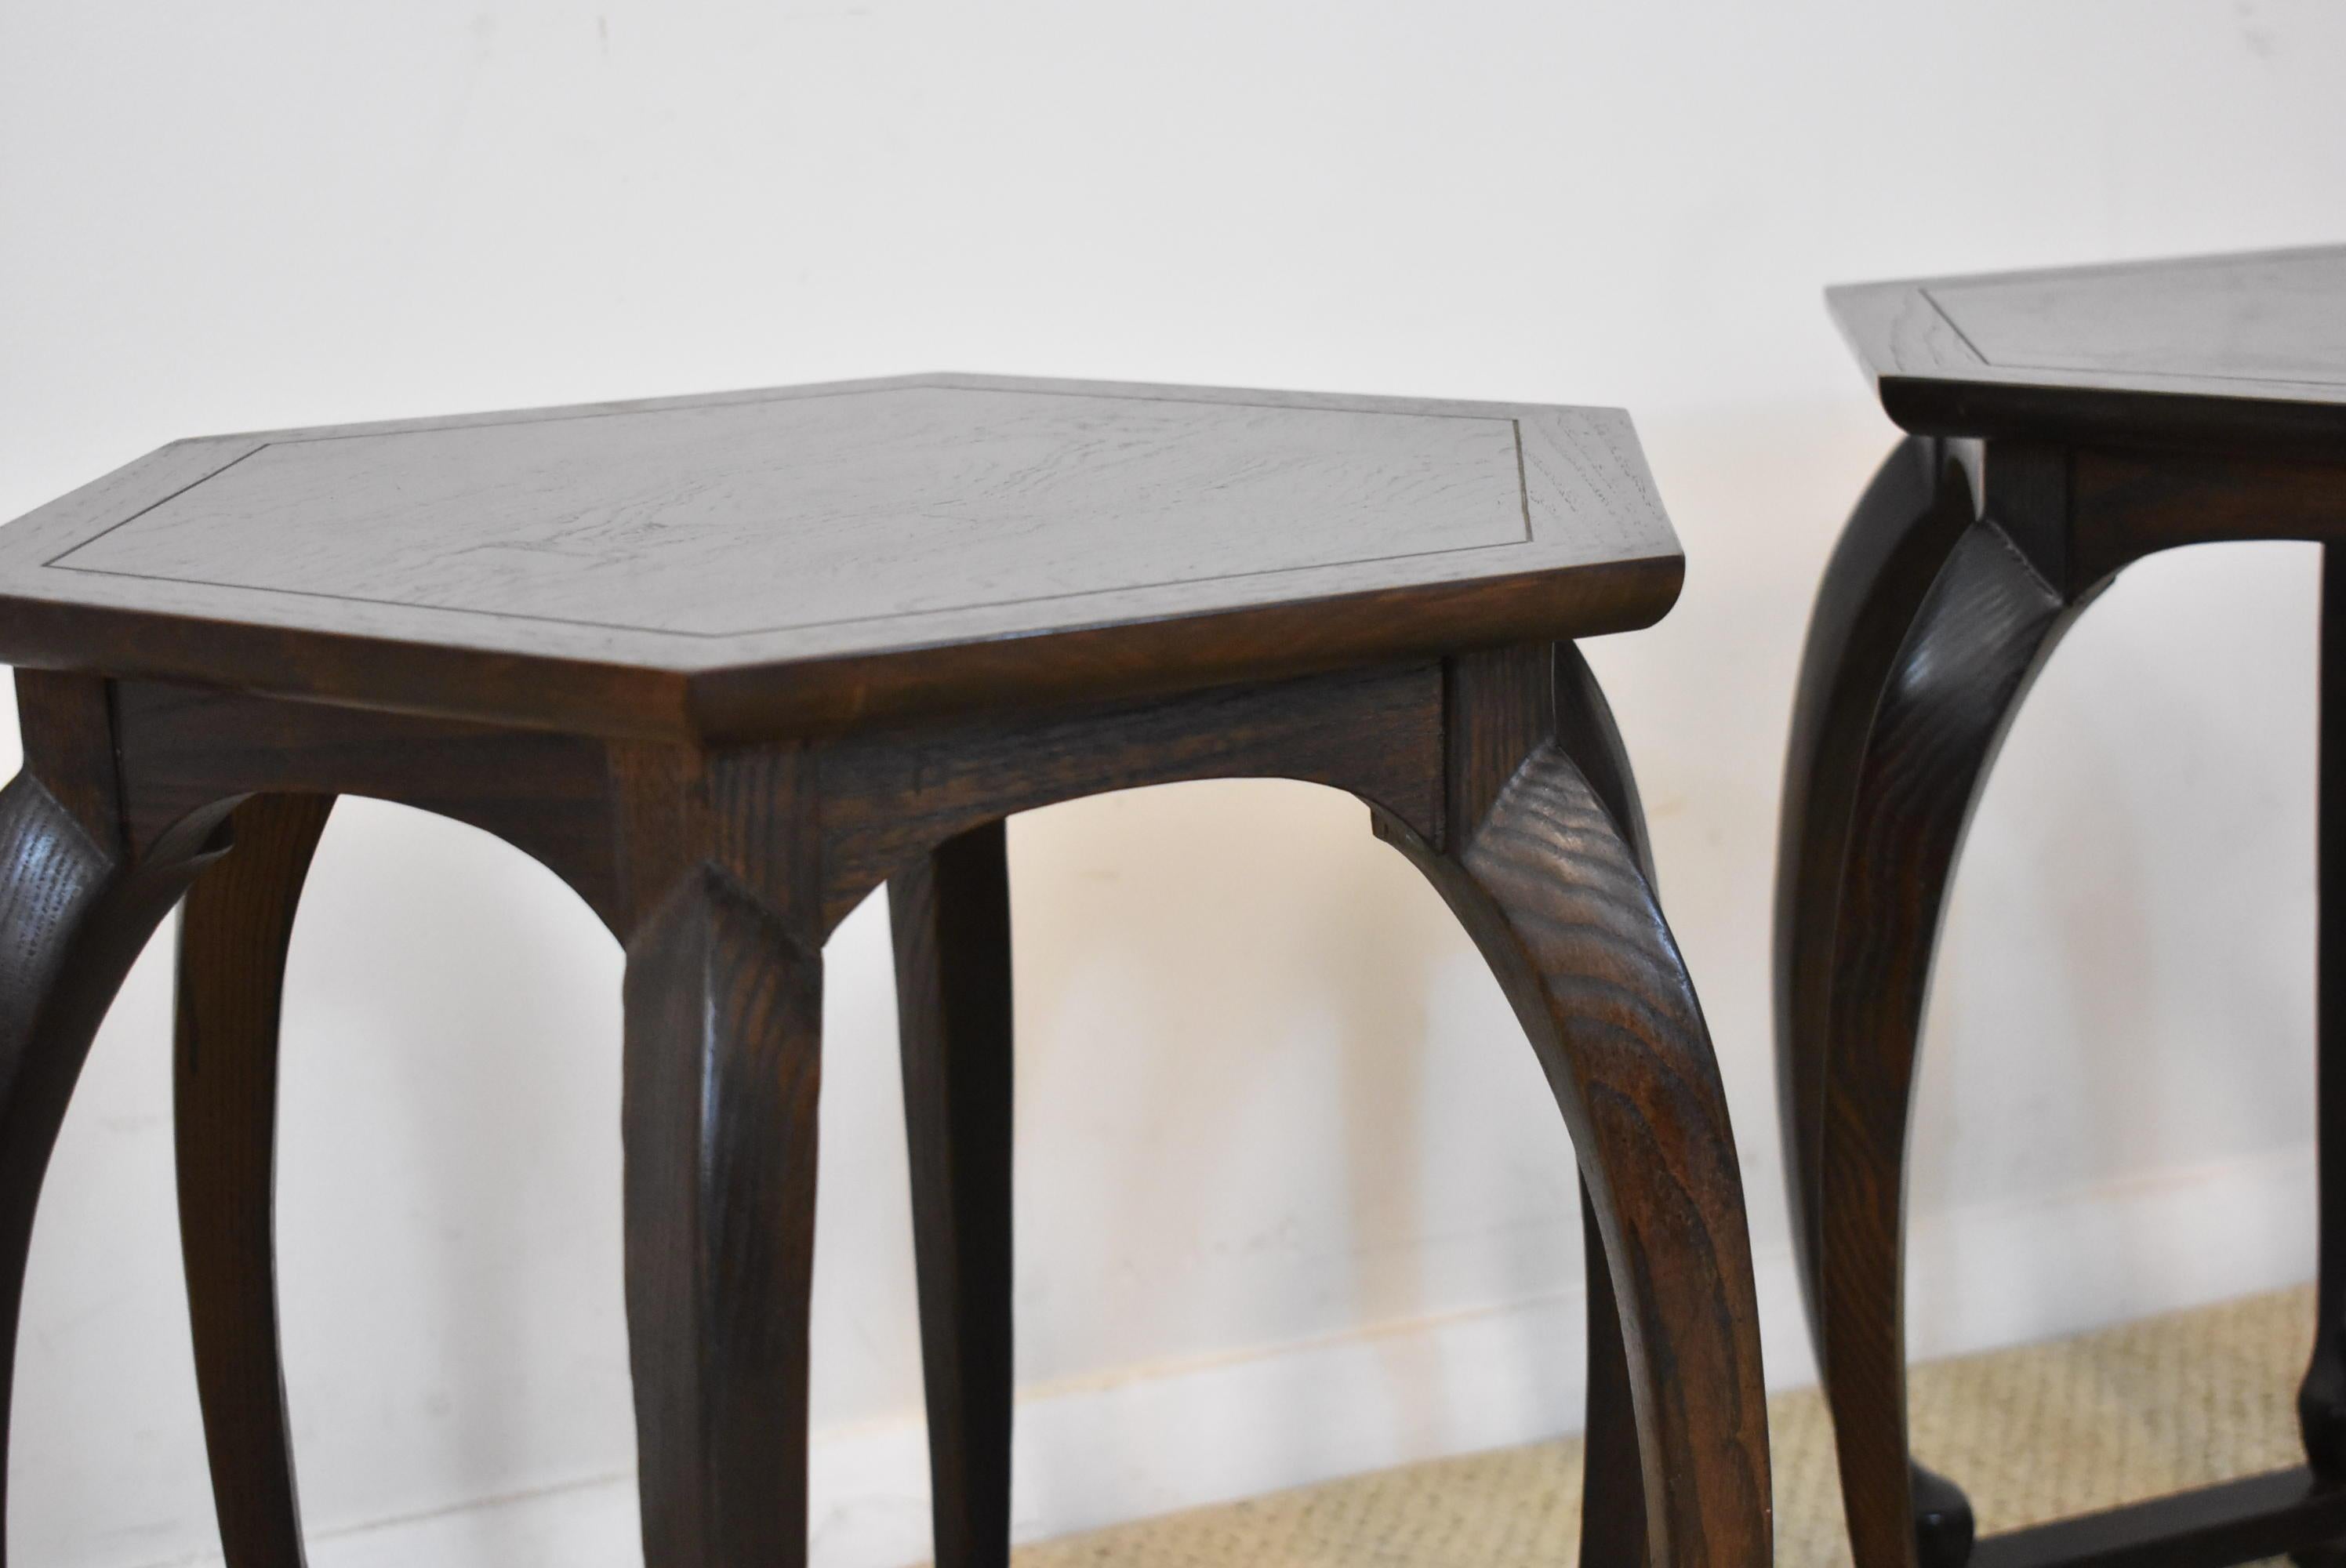 Pair of baker Furniture Asian style dark large grain stands. Hexagon in shape with pieced top.